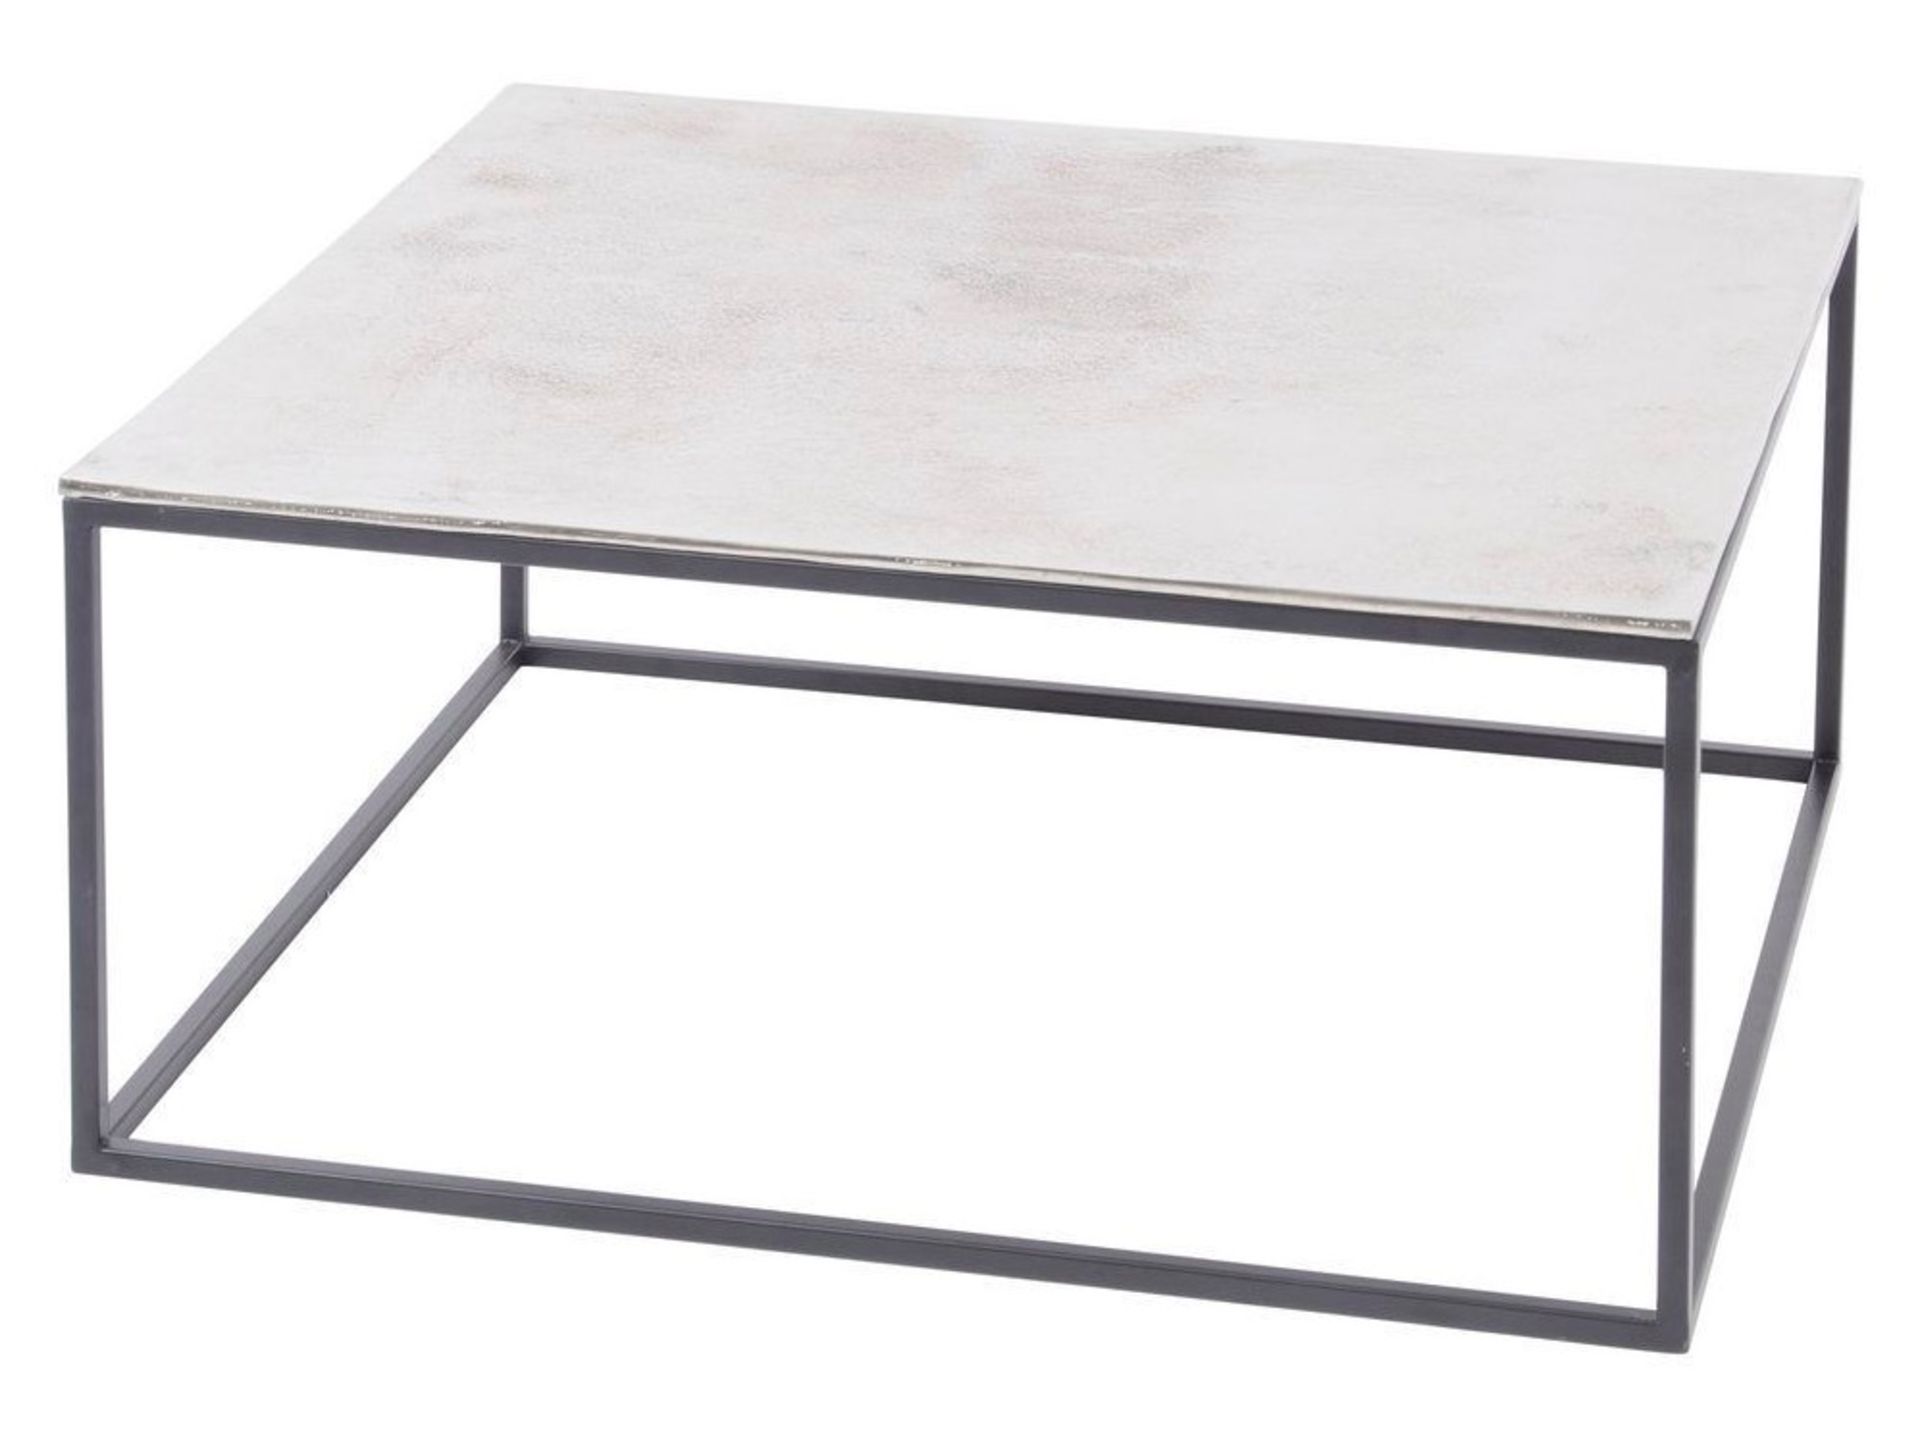 Argenta Silver Metal Coffee Table This silver-topped coffee table is a perfect blend of contemporary